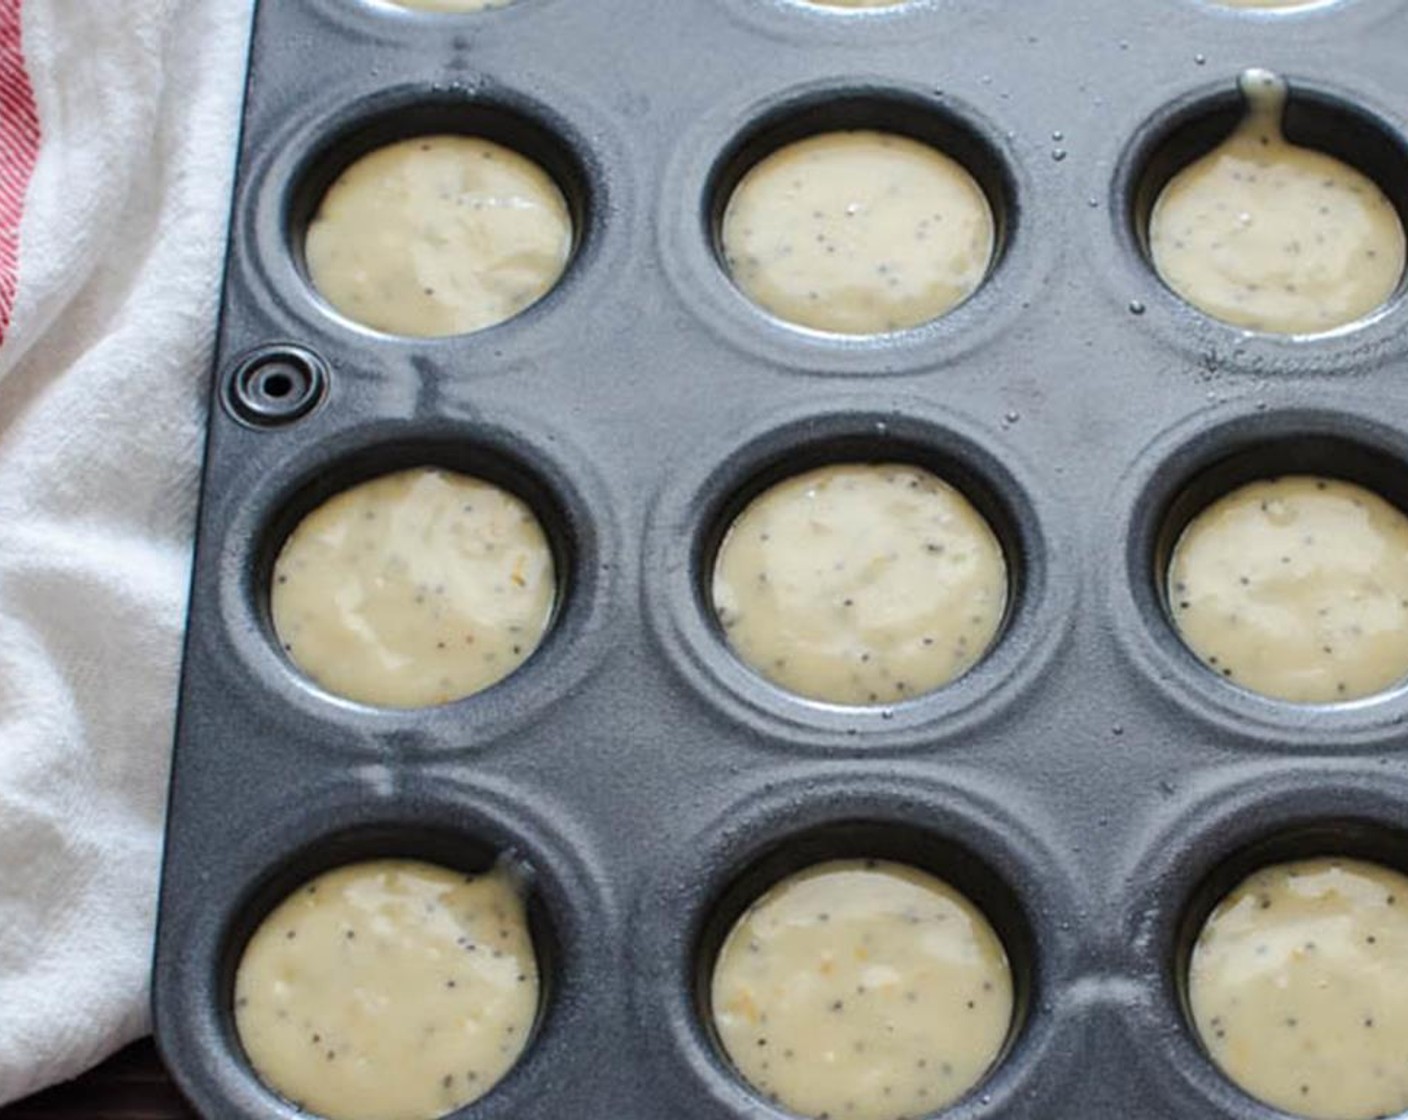 step 4 Spoon the batter into the muffin cups and bake for 11-13 minutes, or until golden brown on top.